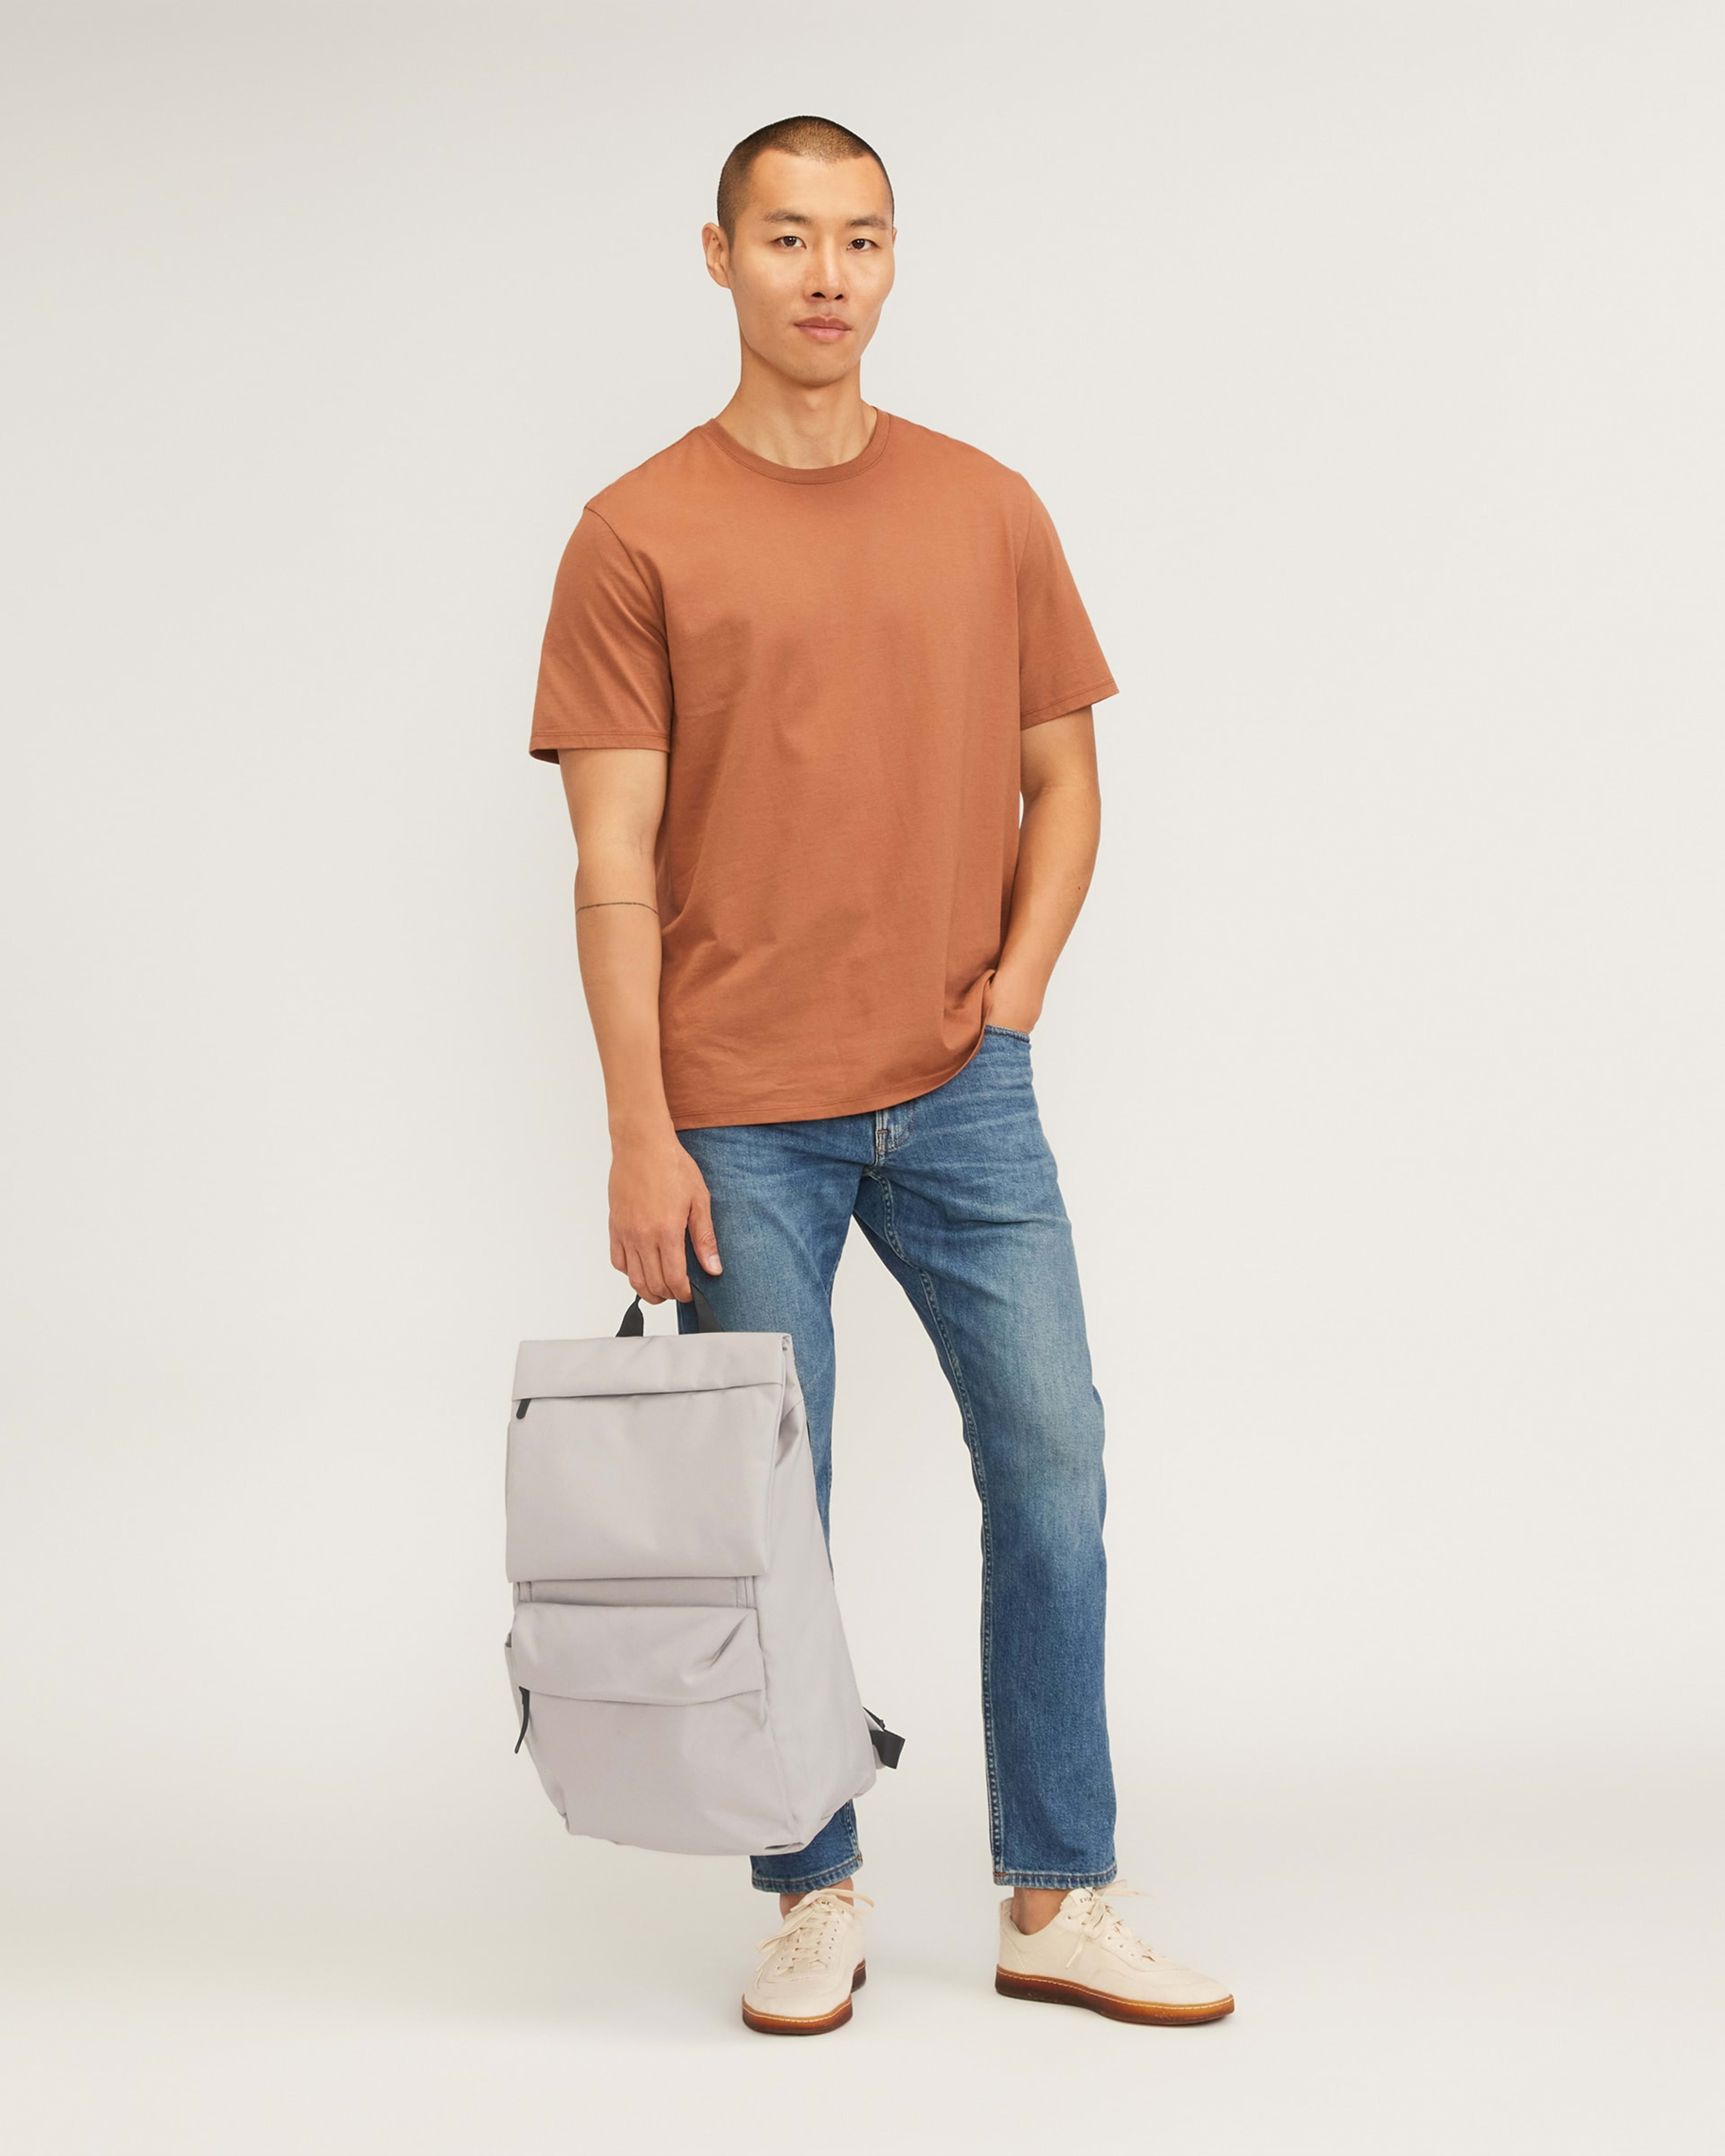 Everlane's ReNew Collection: Good Clothes for a Good Cause